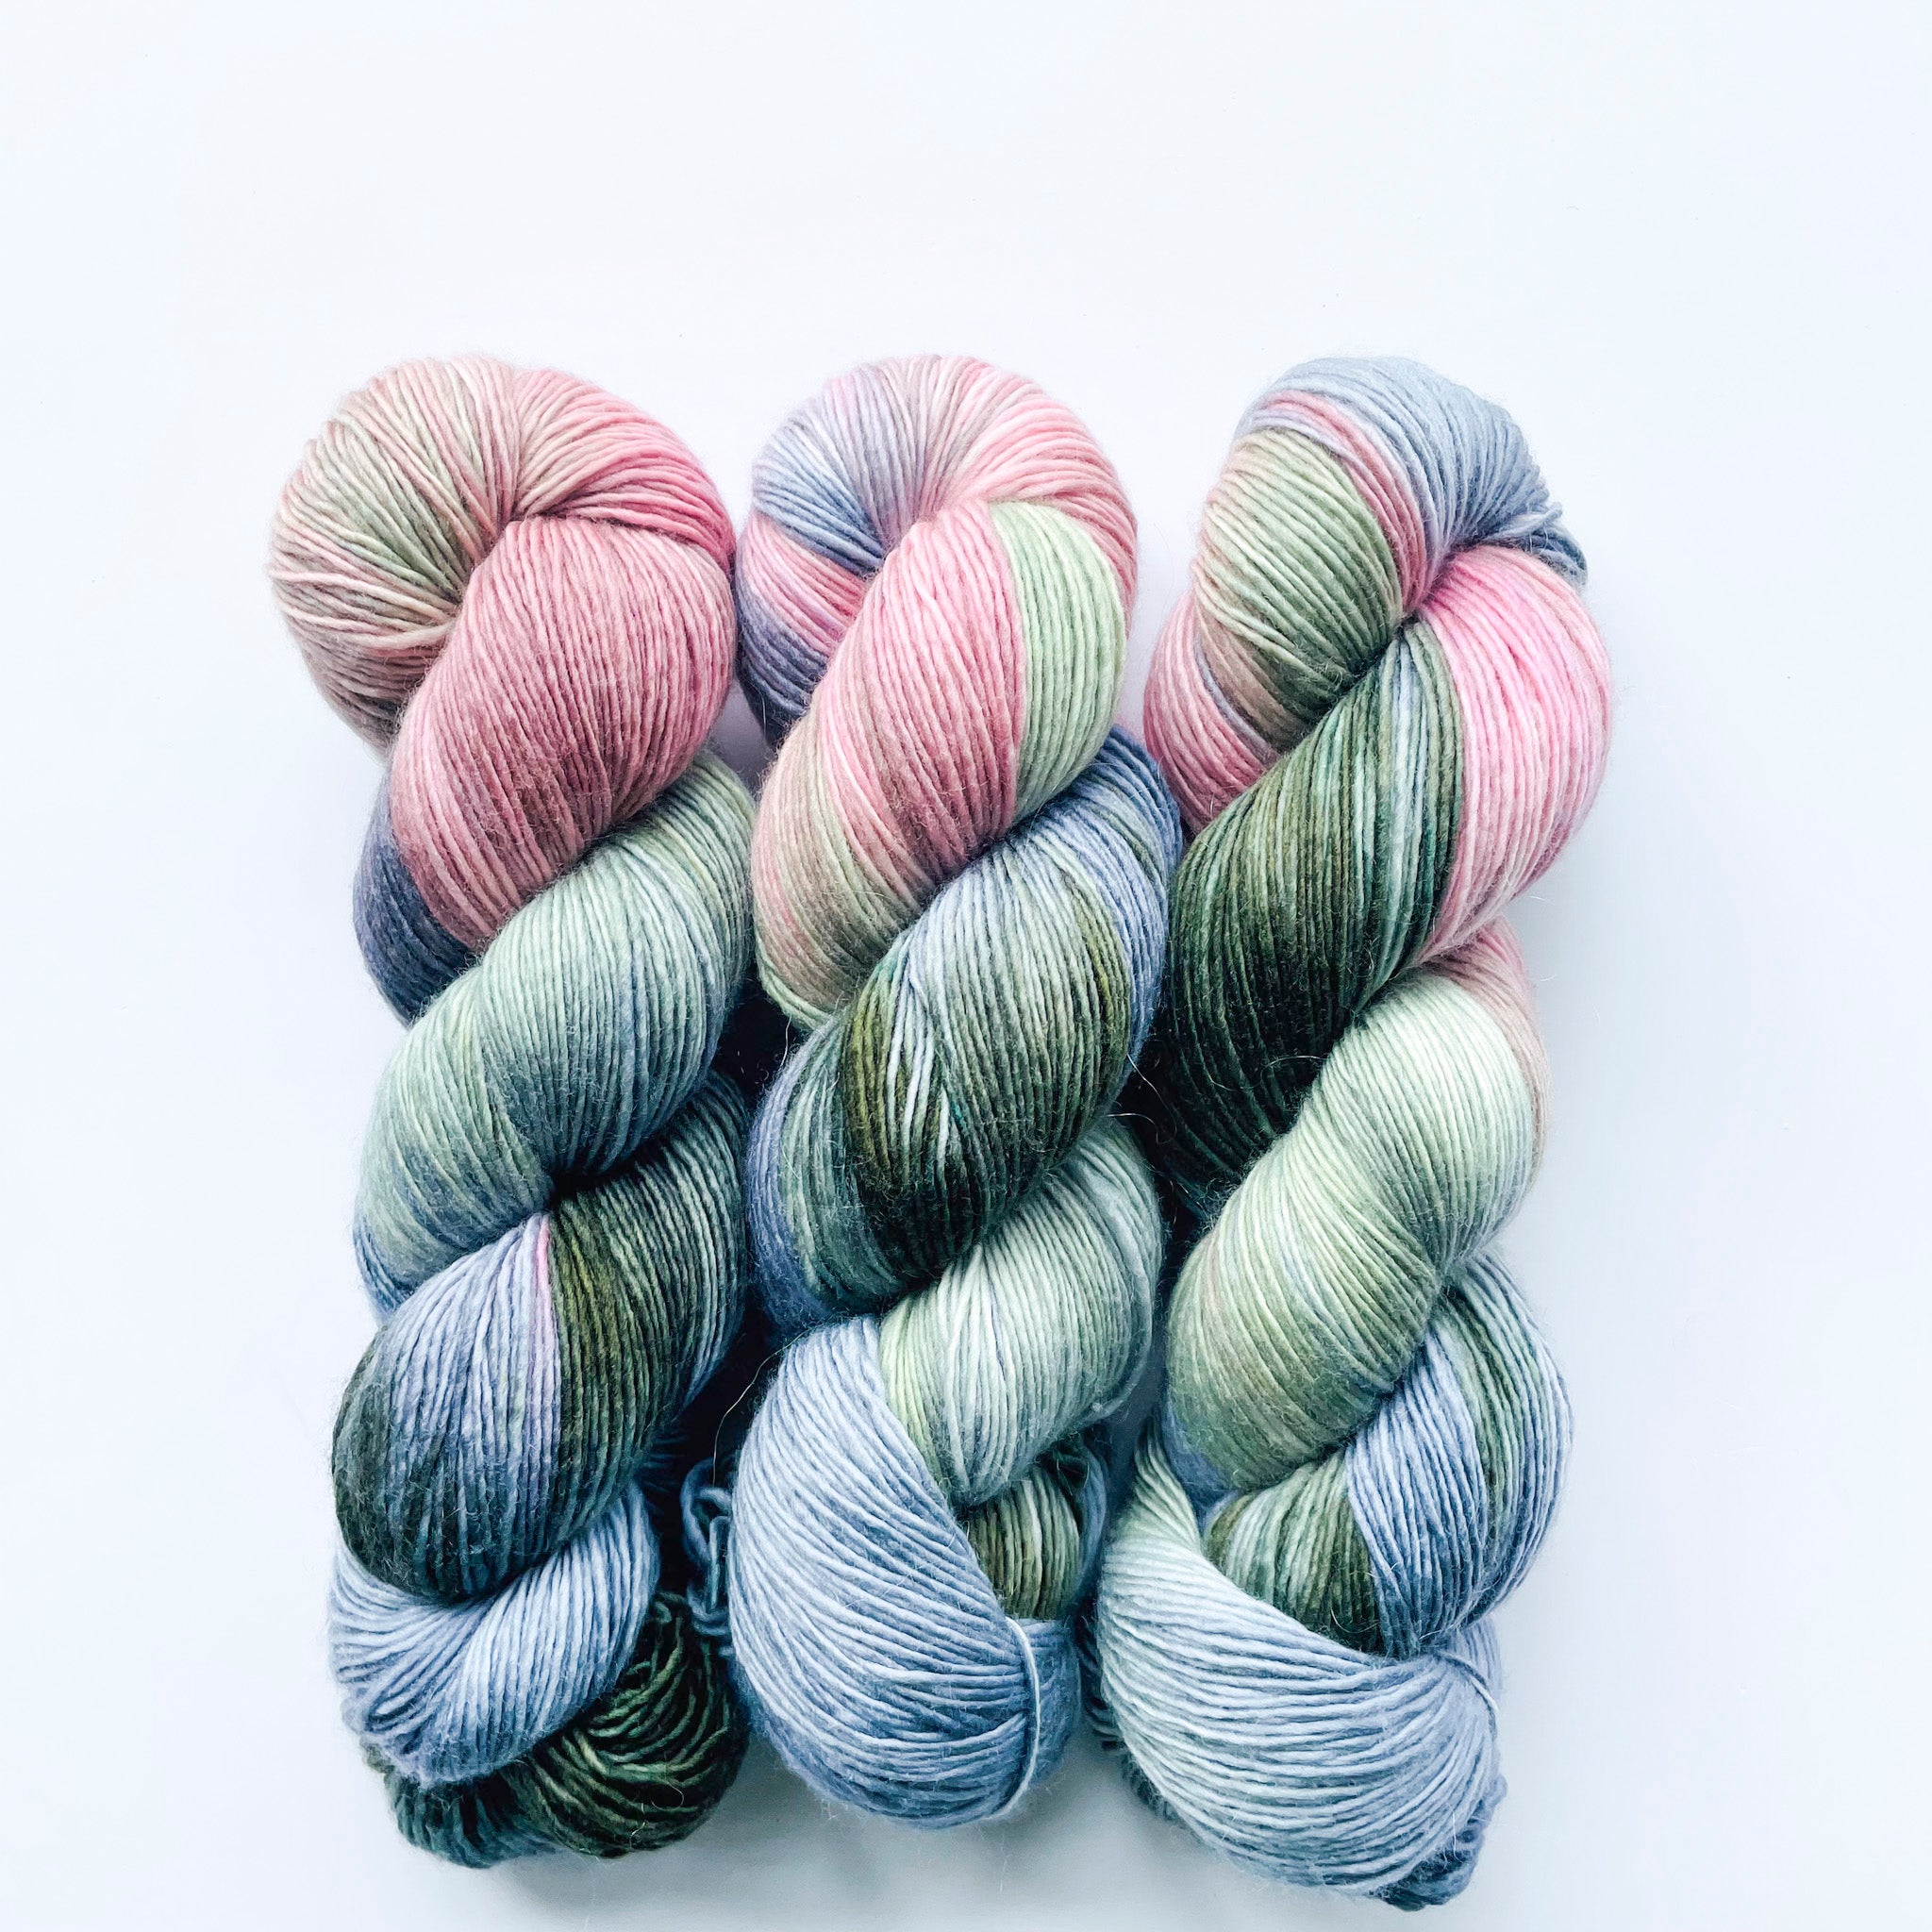 Qing Fibre - Indie Hand-Dyed Yarn and Knitting Patterns